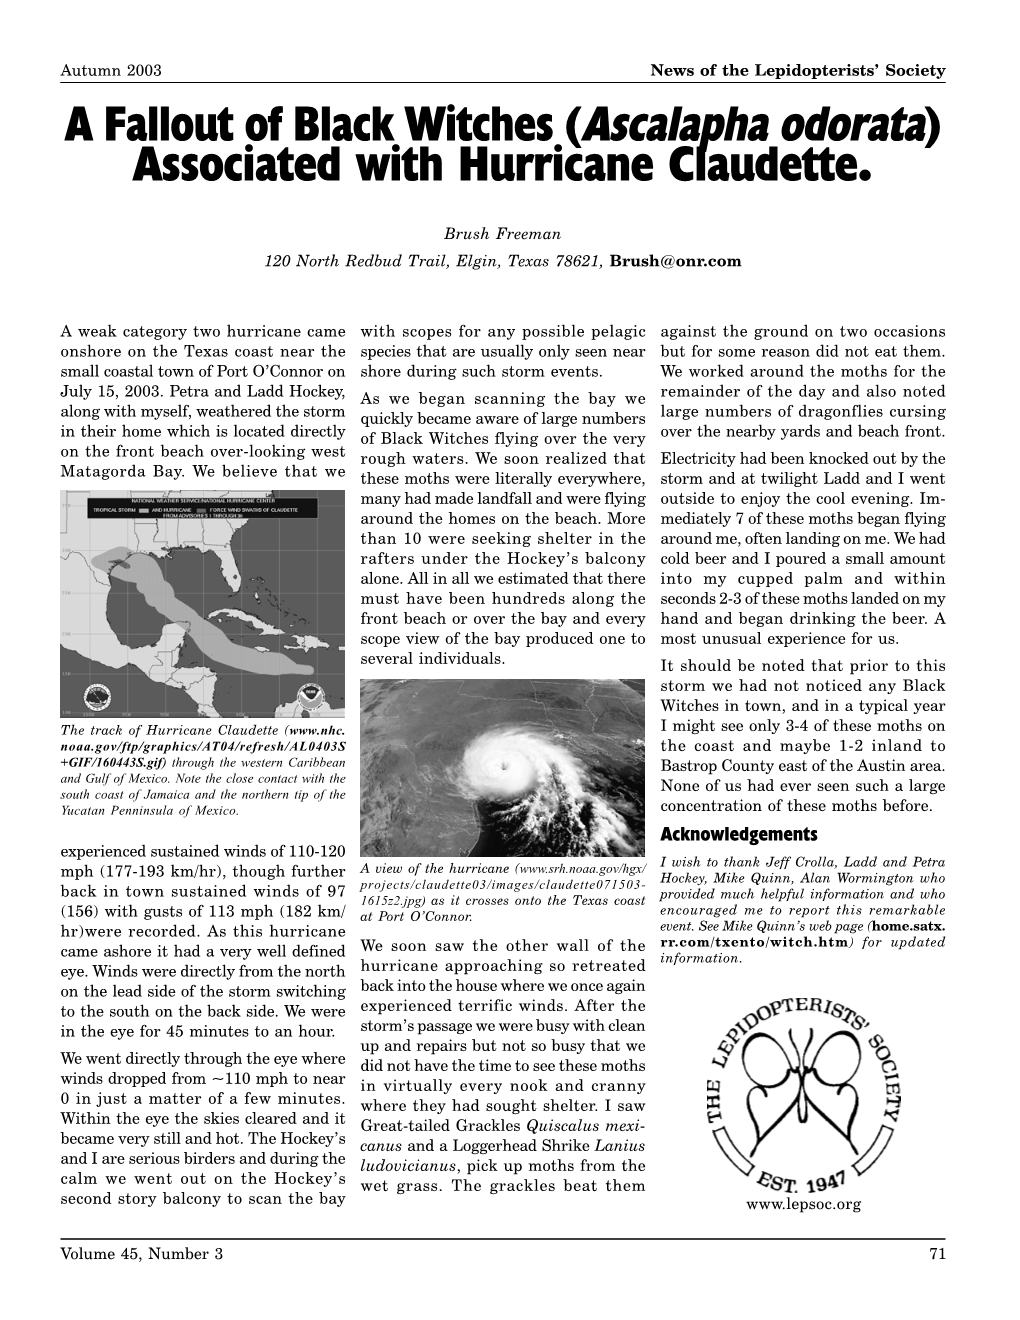 A Fallout of Black Witches (Ascalapha Odorata) Associated with Hurricane Claudette